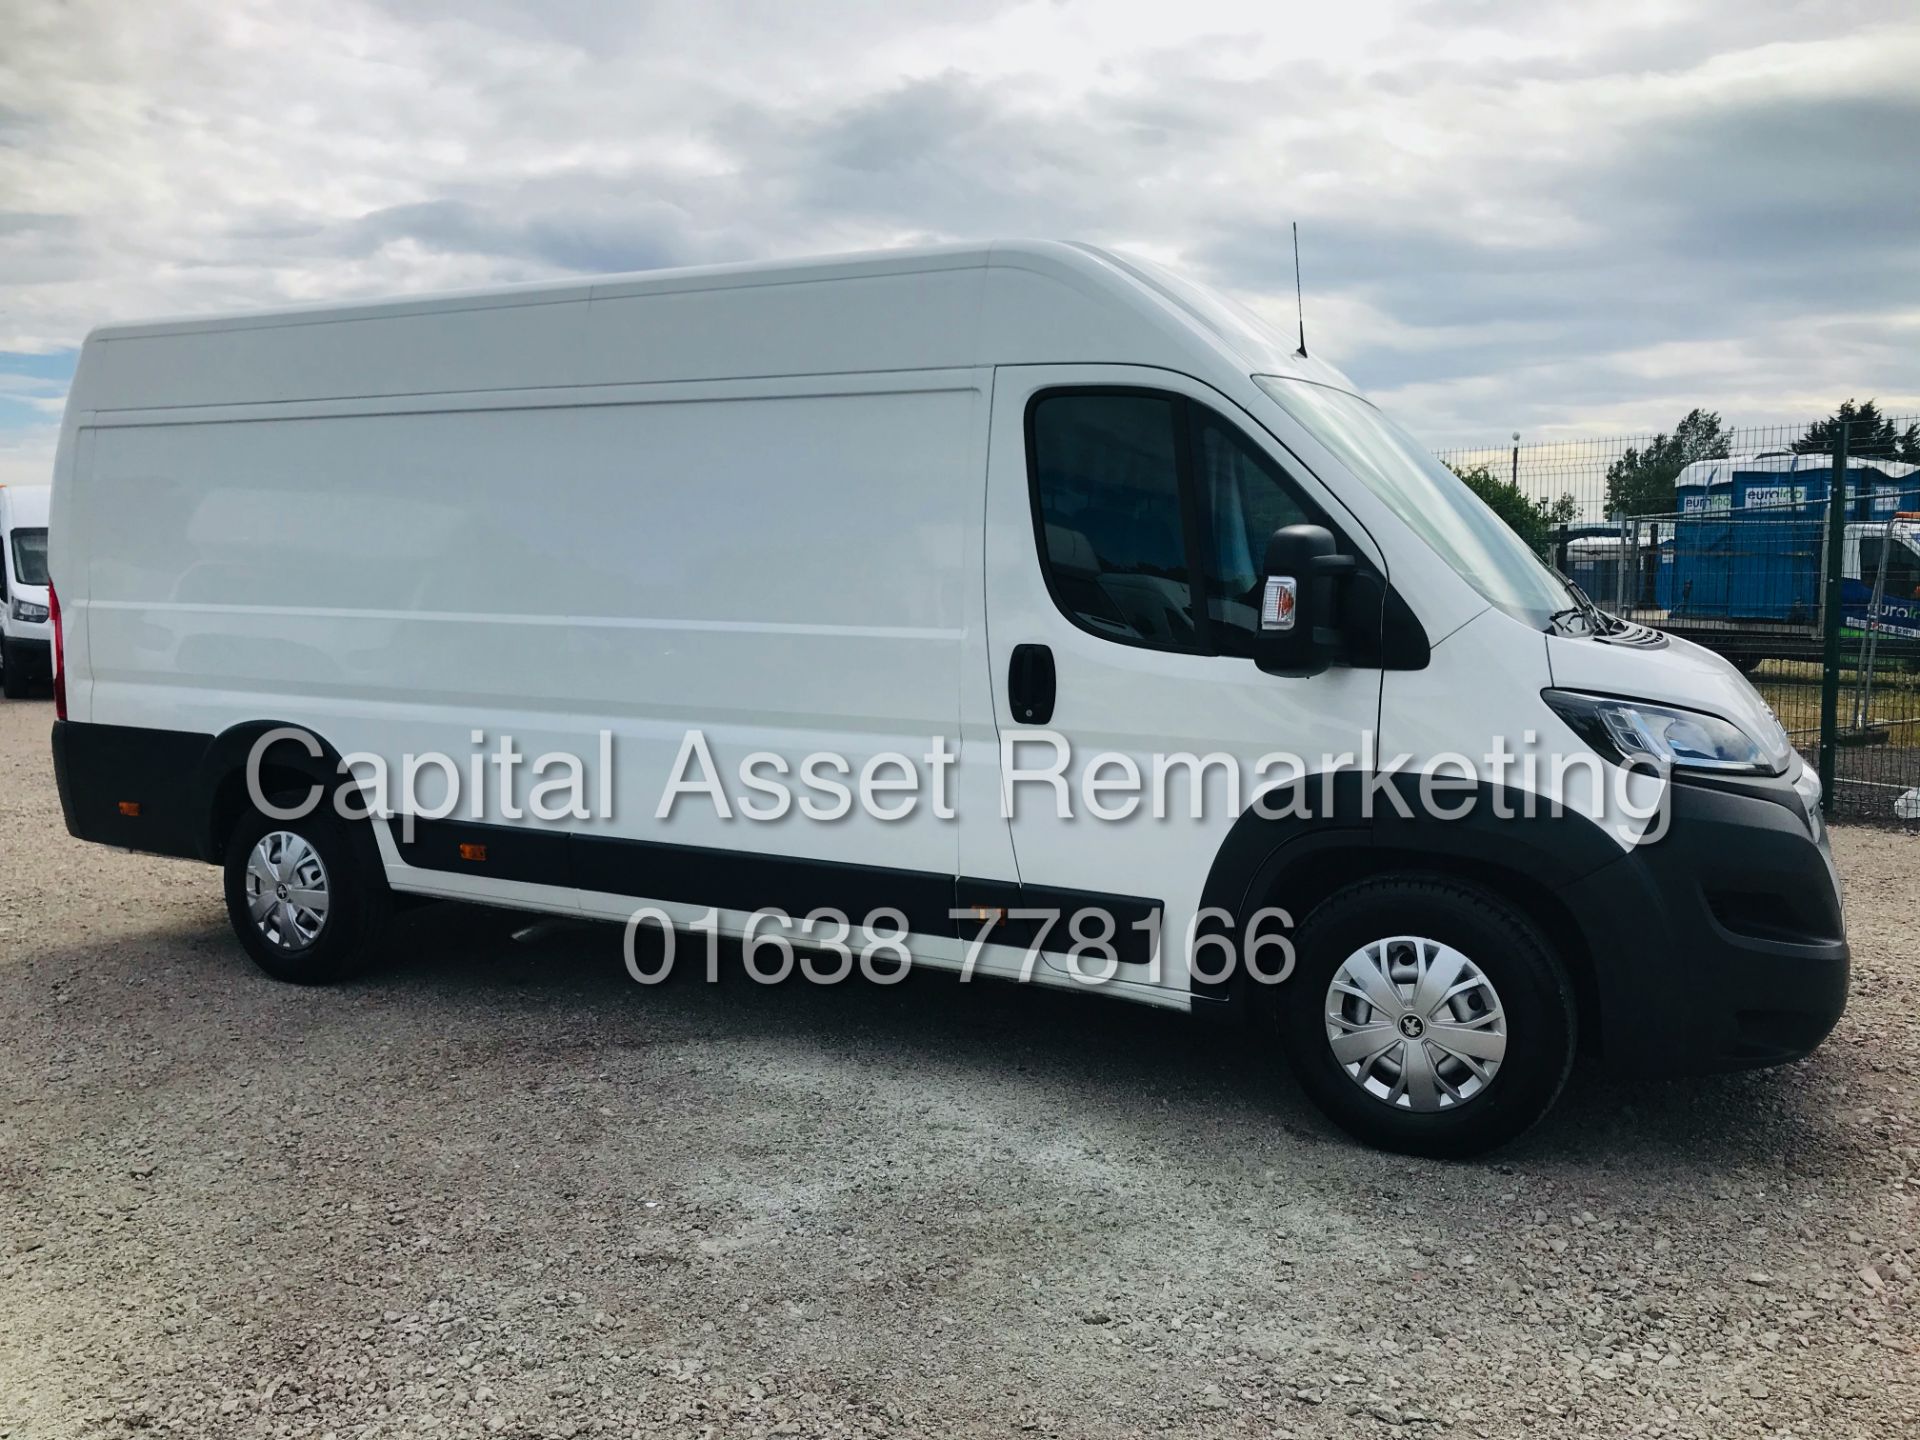 (ON SALE) PEUGEOT BOXER 2.0 BLUE-HDI "PROFESSIONAL" L4 "MAXI" 1 OWNER (2019 MODEL) AIR CON - SAT NAV